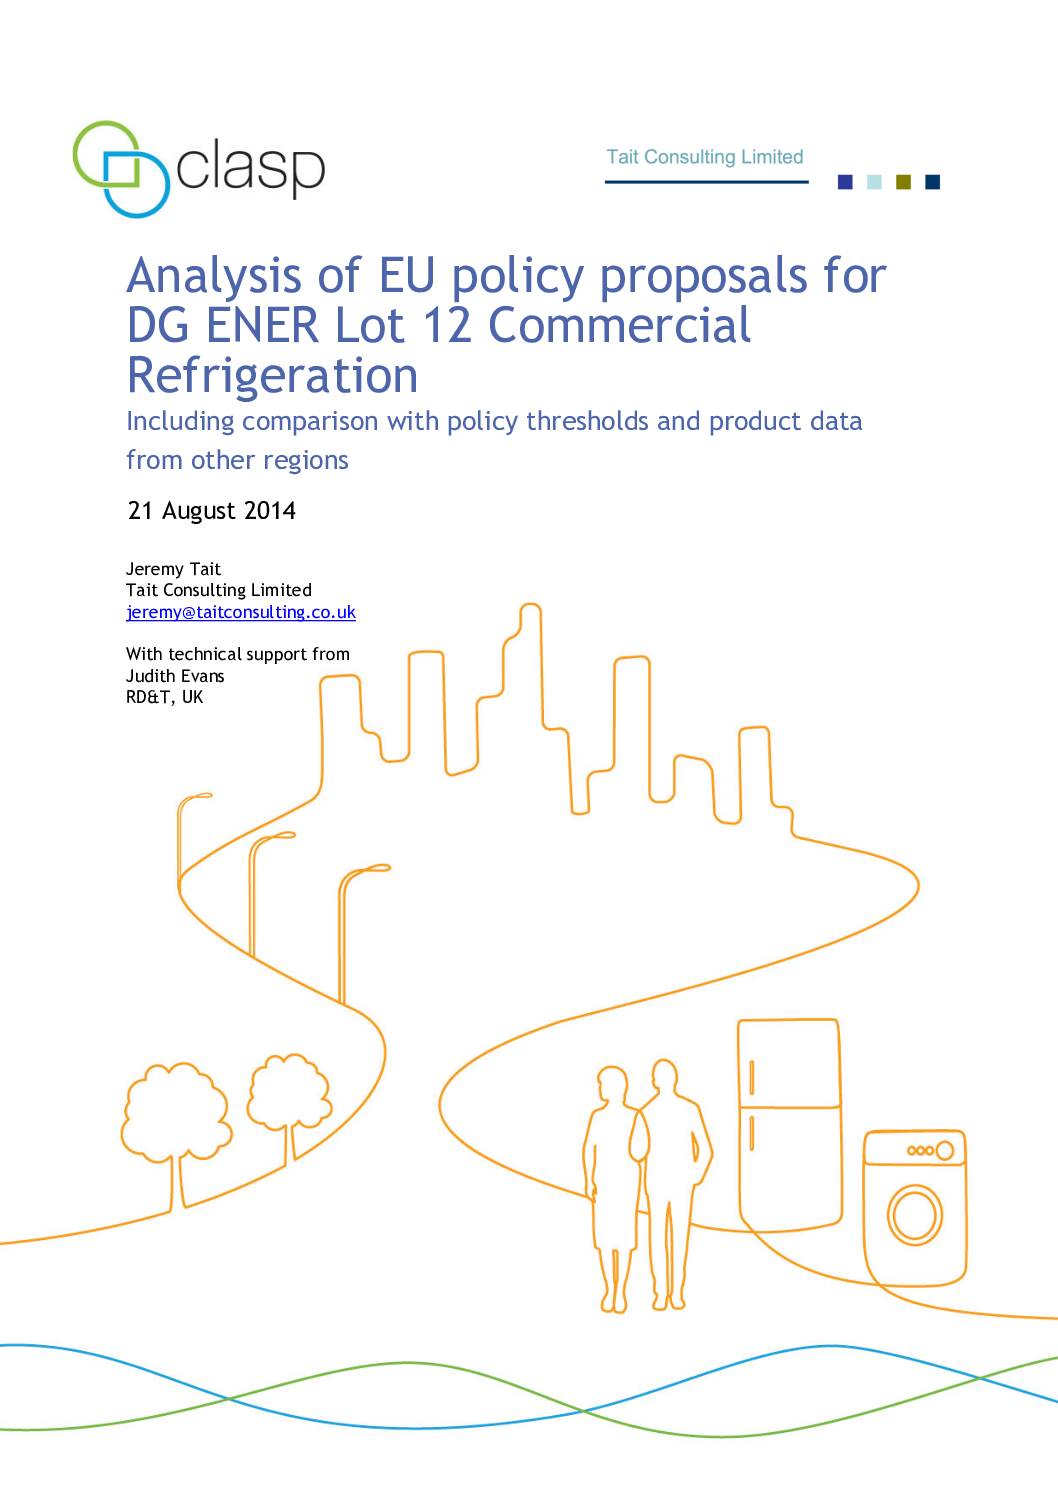 Analysis of EU policy proposals for DG ENER Lot 12 Commercial Refrigeration